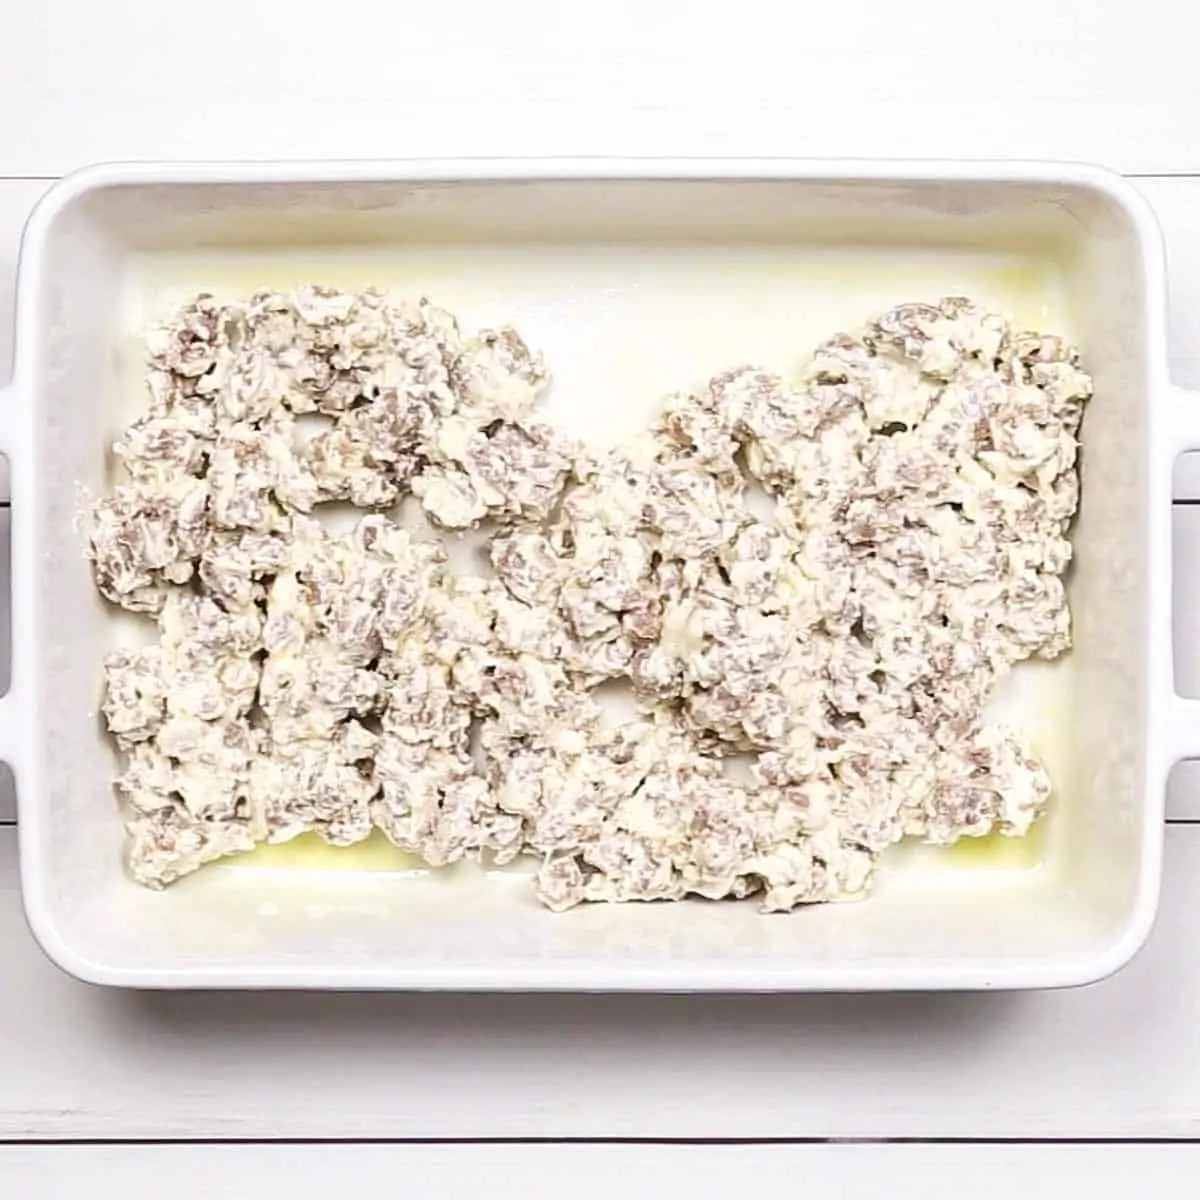 sausage cream cheese mix arranged in a baking dish to make Spinach and Sausage Quiche